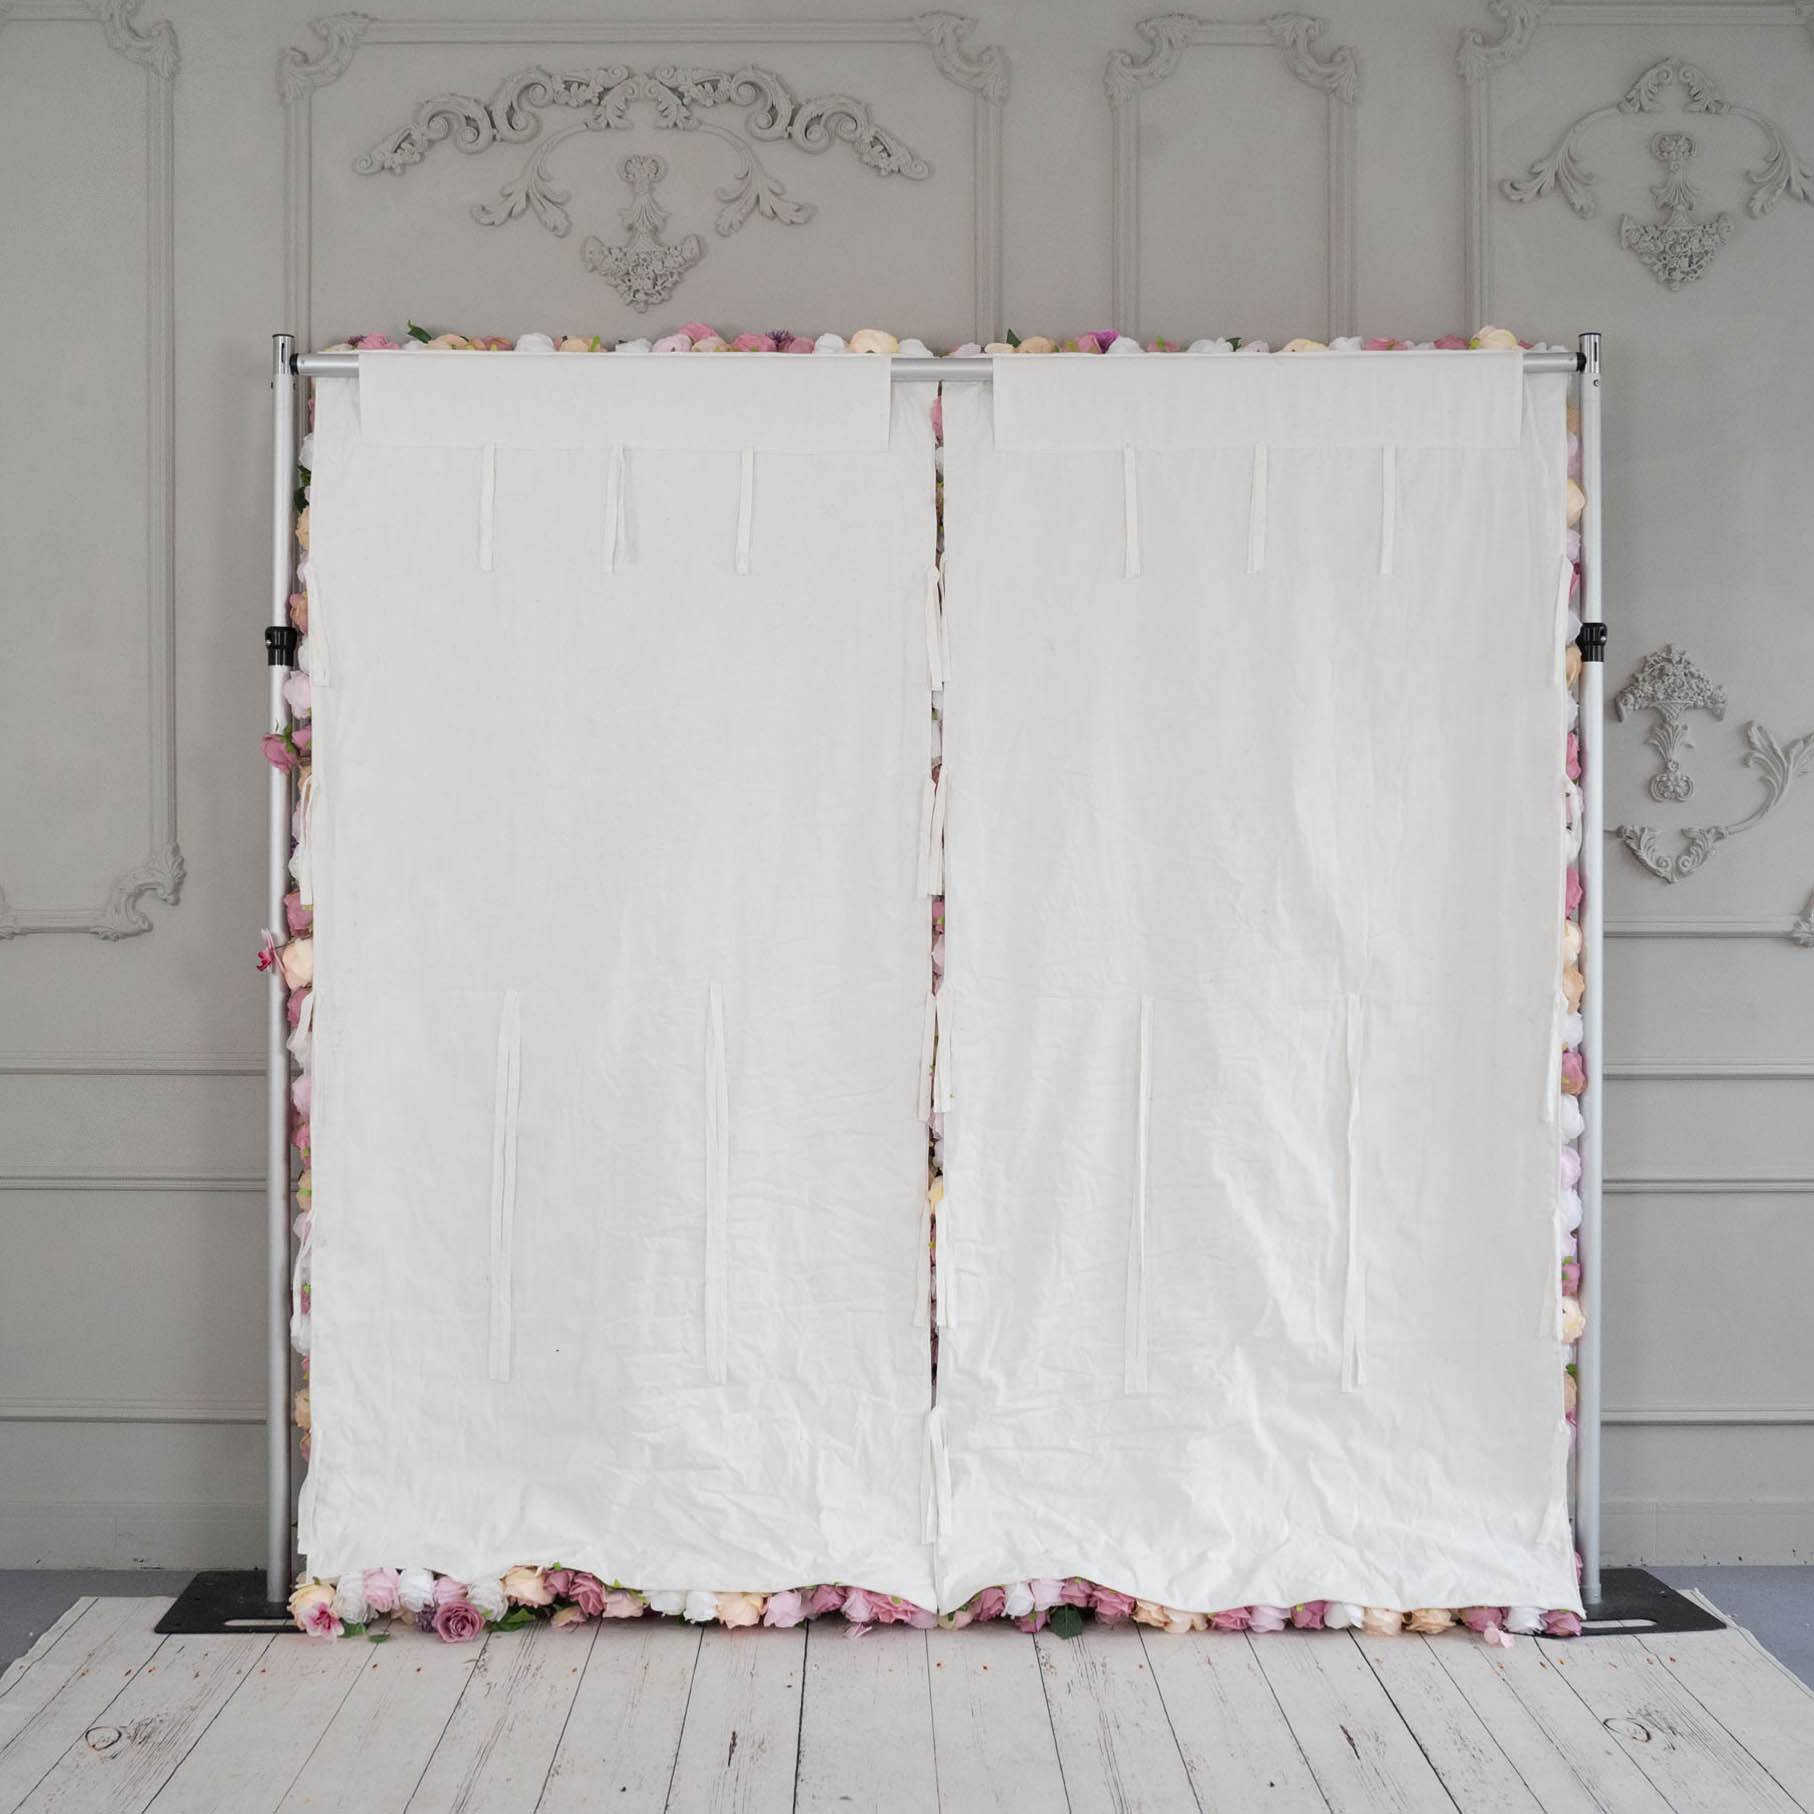 The fabric backing of flower wall